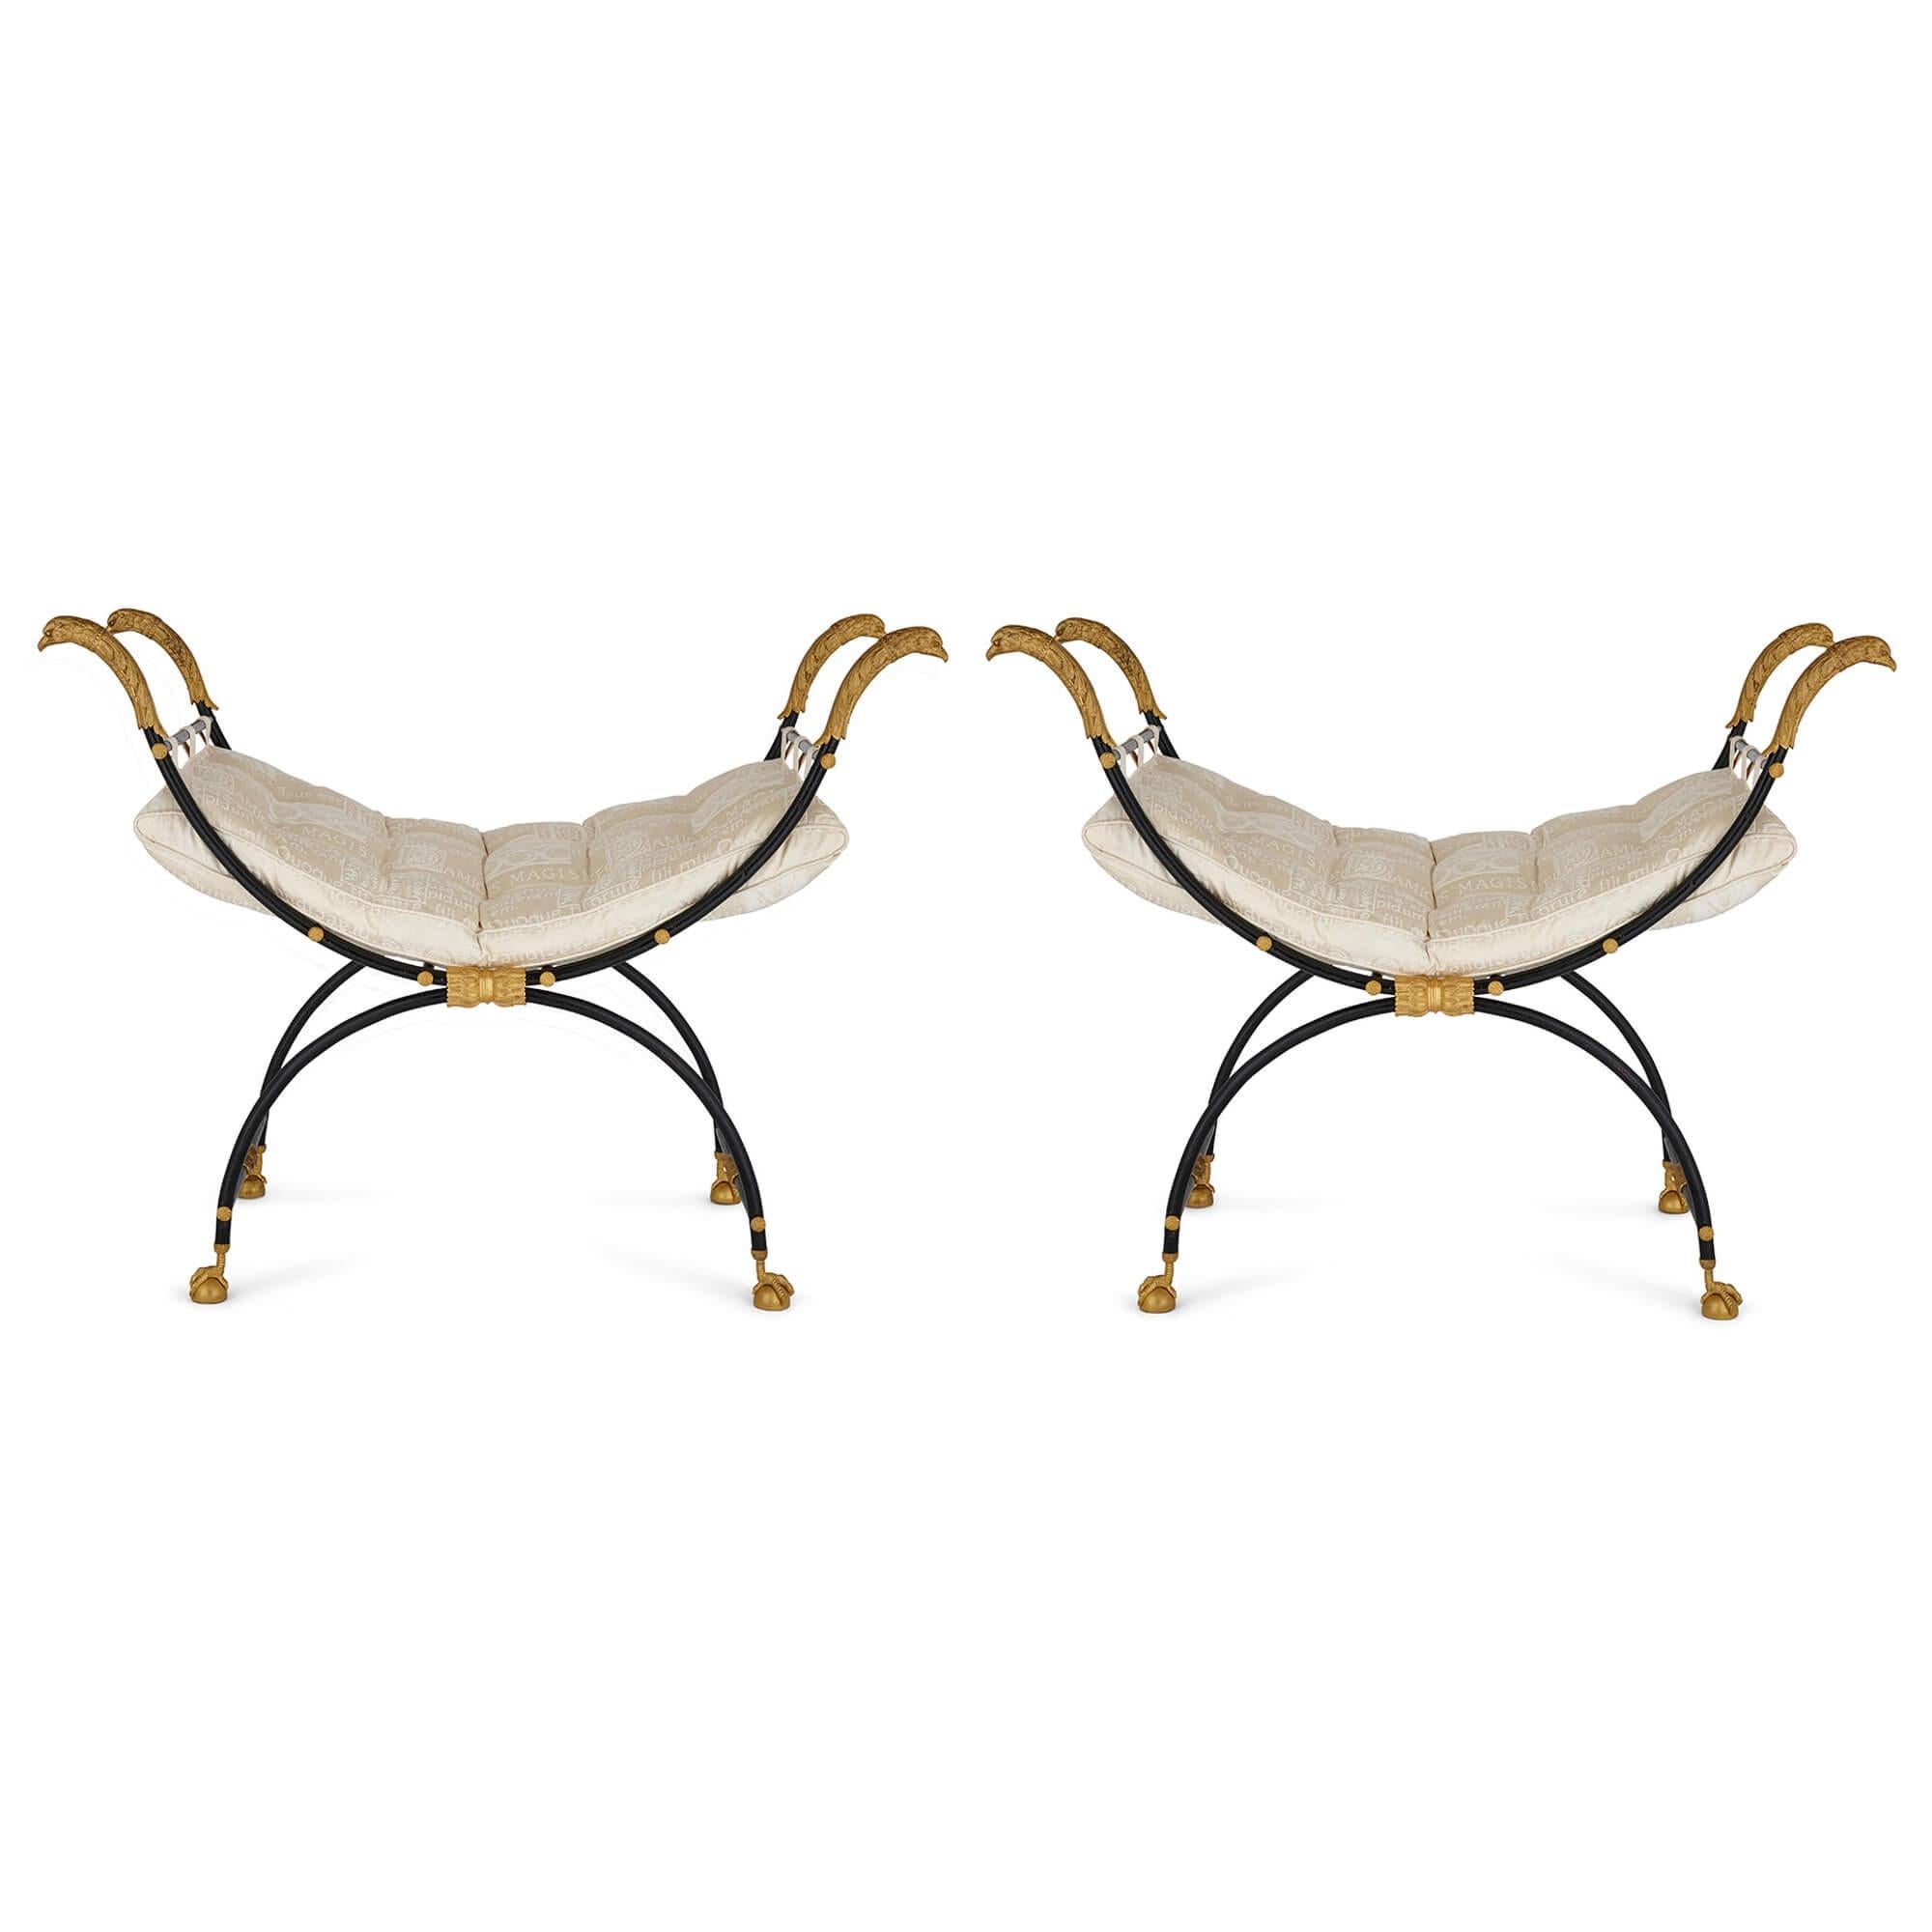 These beautiful, simple, and sophisticated, curule chairs were executed in the Empire style, combining the majesty of Roman rule with Napoleonic imperial France. Long a symbol of rule and power, curule chairs originally appeared in the Roman